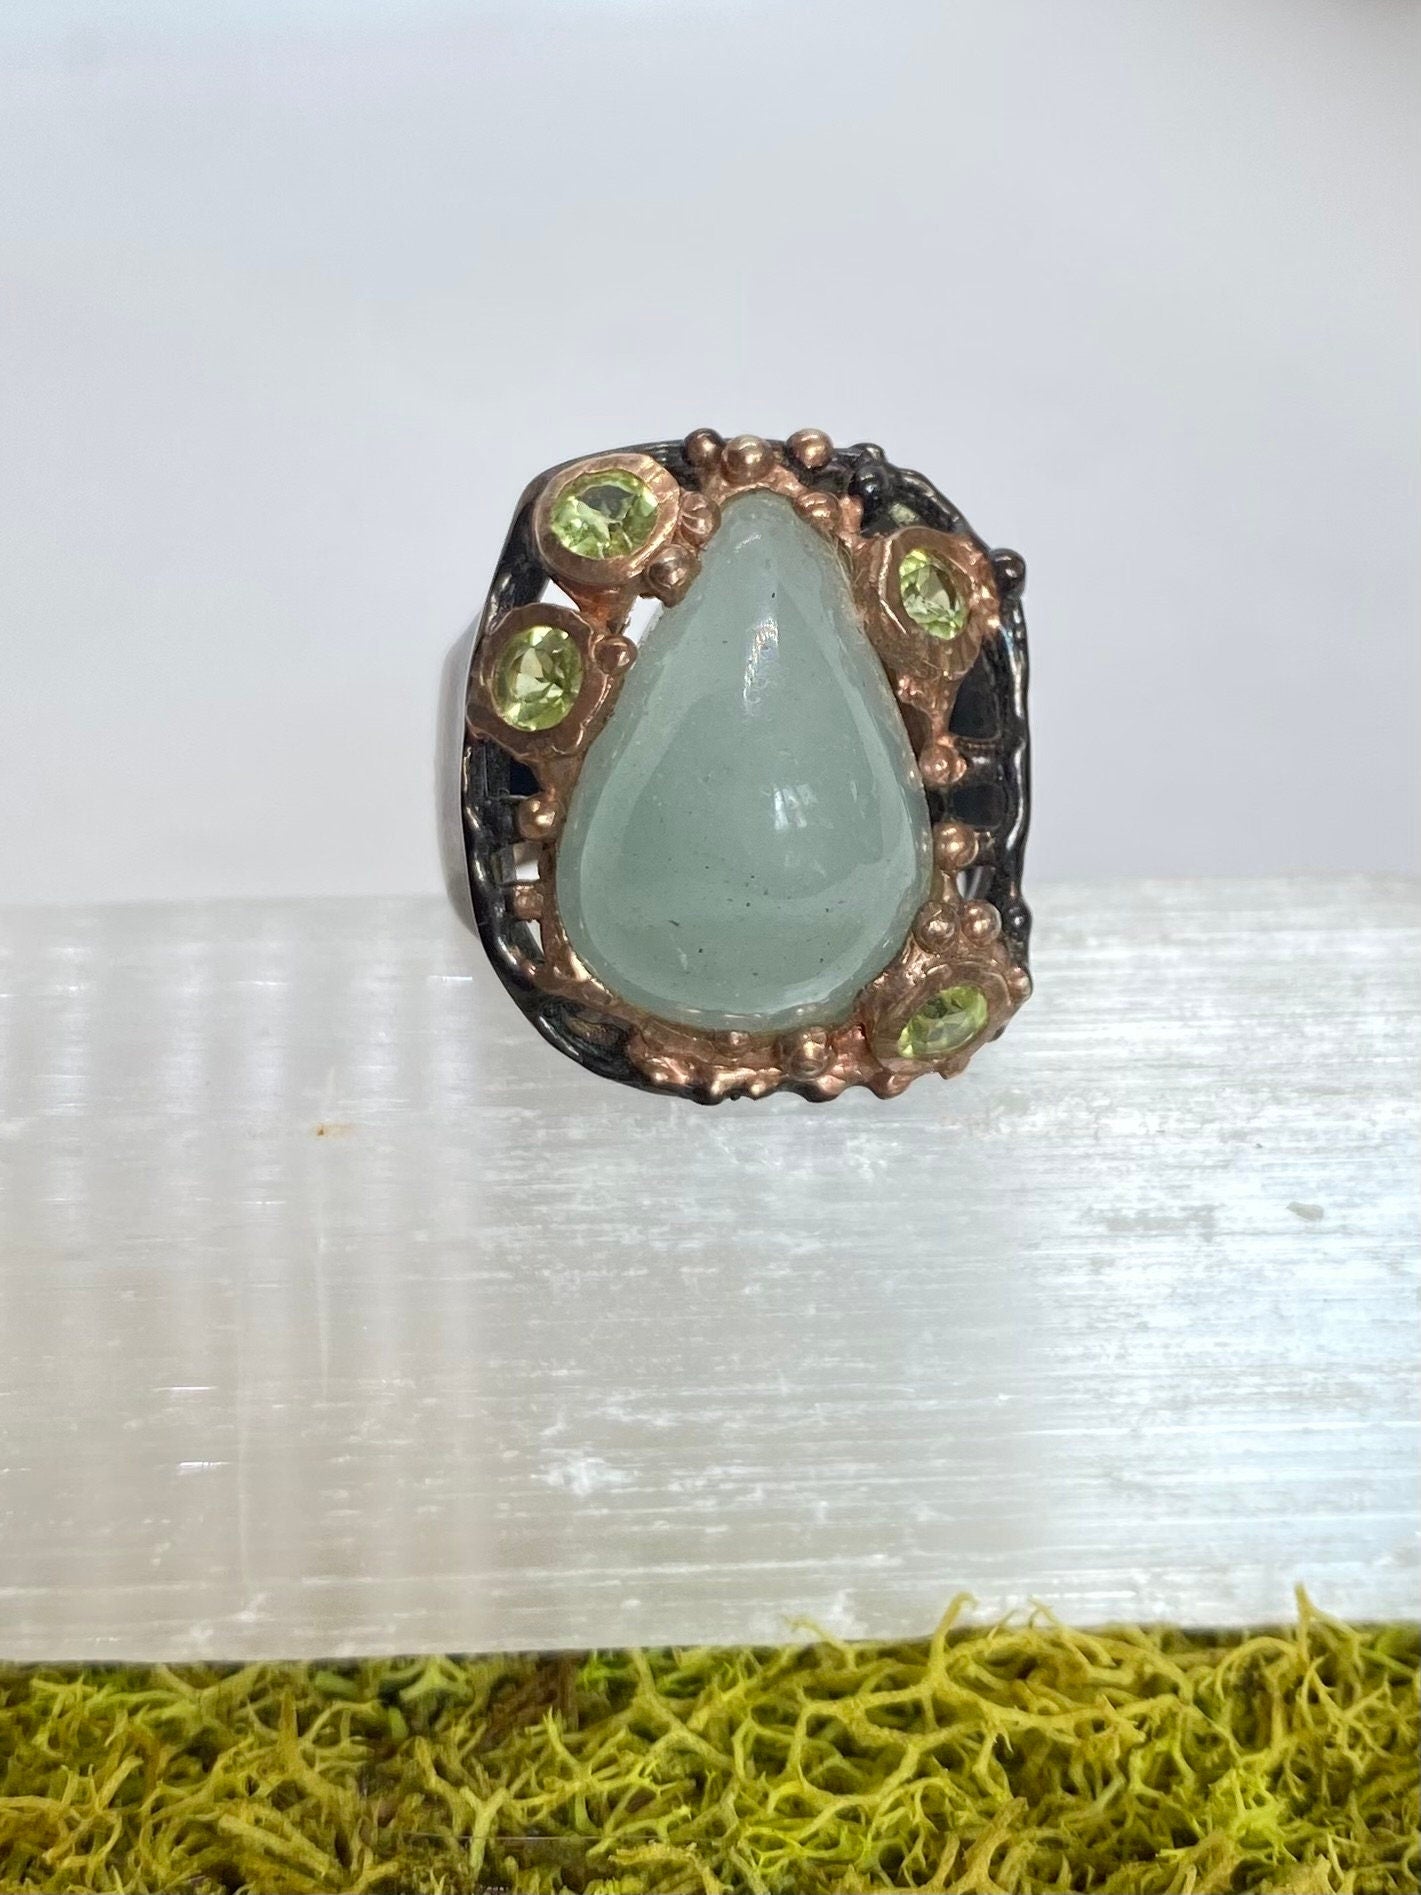 Aquamarine & Peridot One of a Kind Ring size 8 • Sterling Silver with Black Rhodium Plating